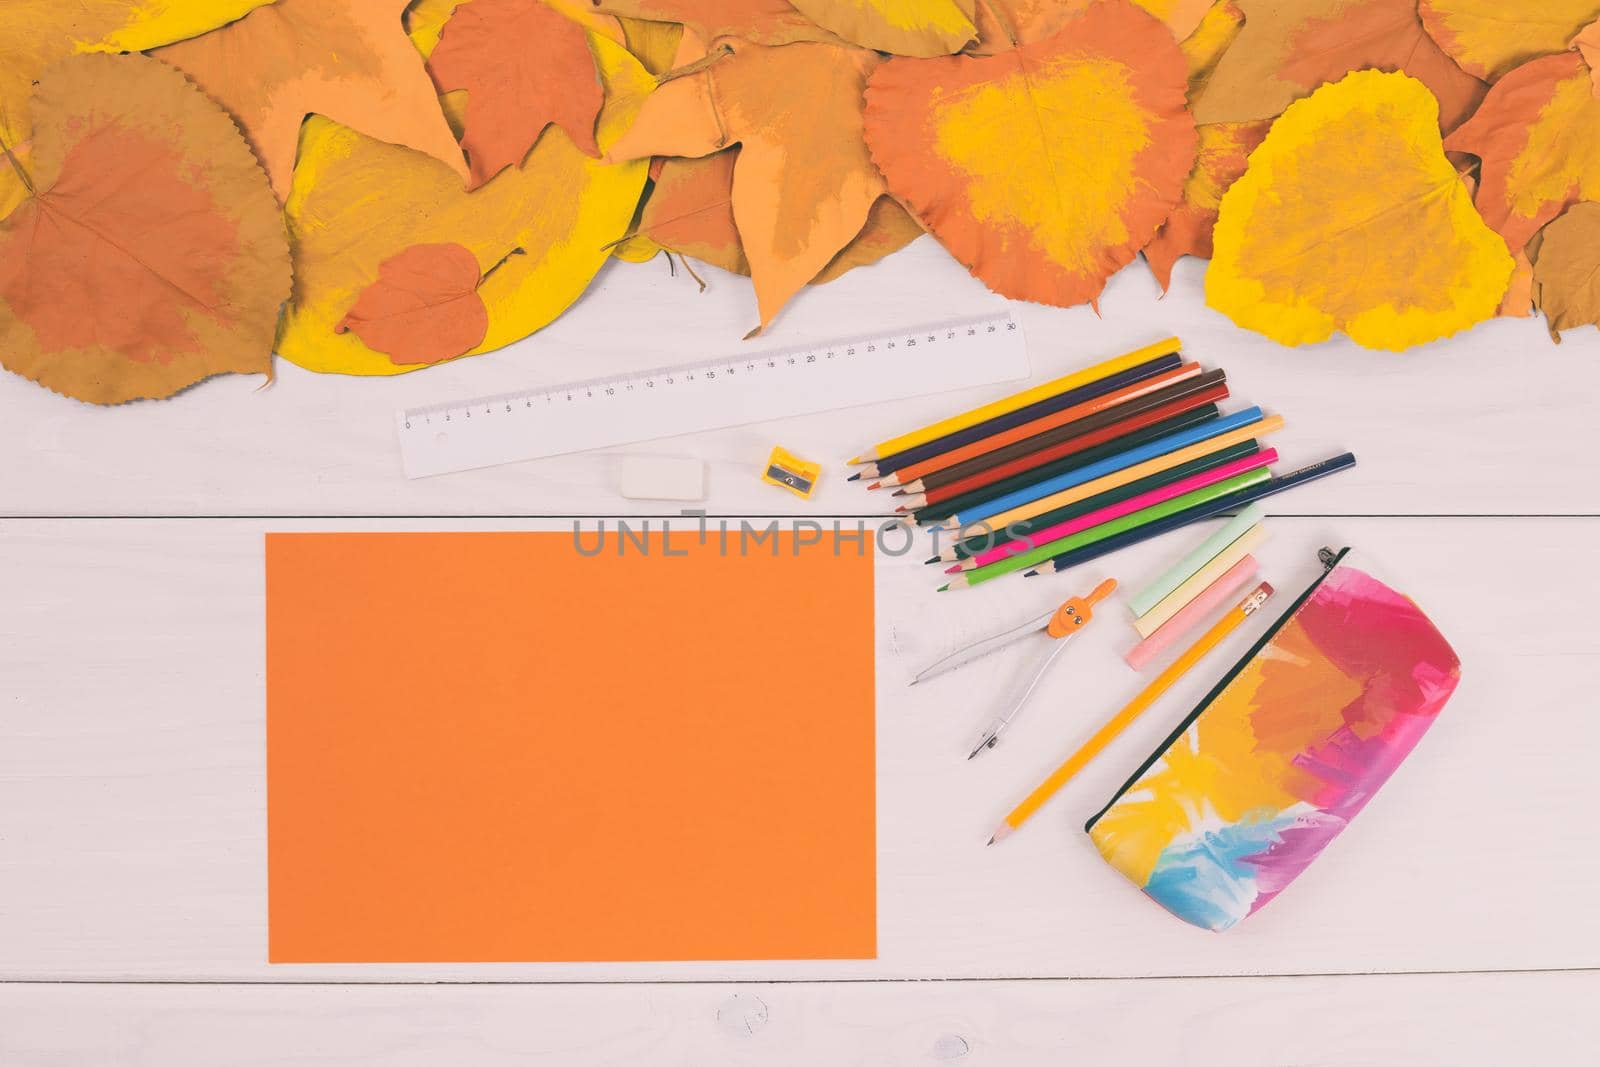 Empty orange paper and school supplies on wooden table with painted leaves.Toned image.